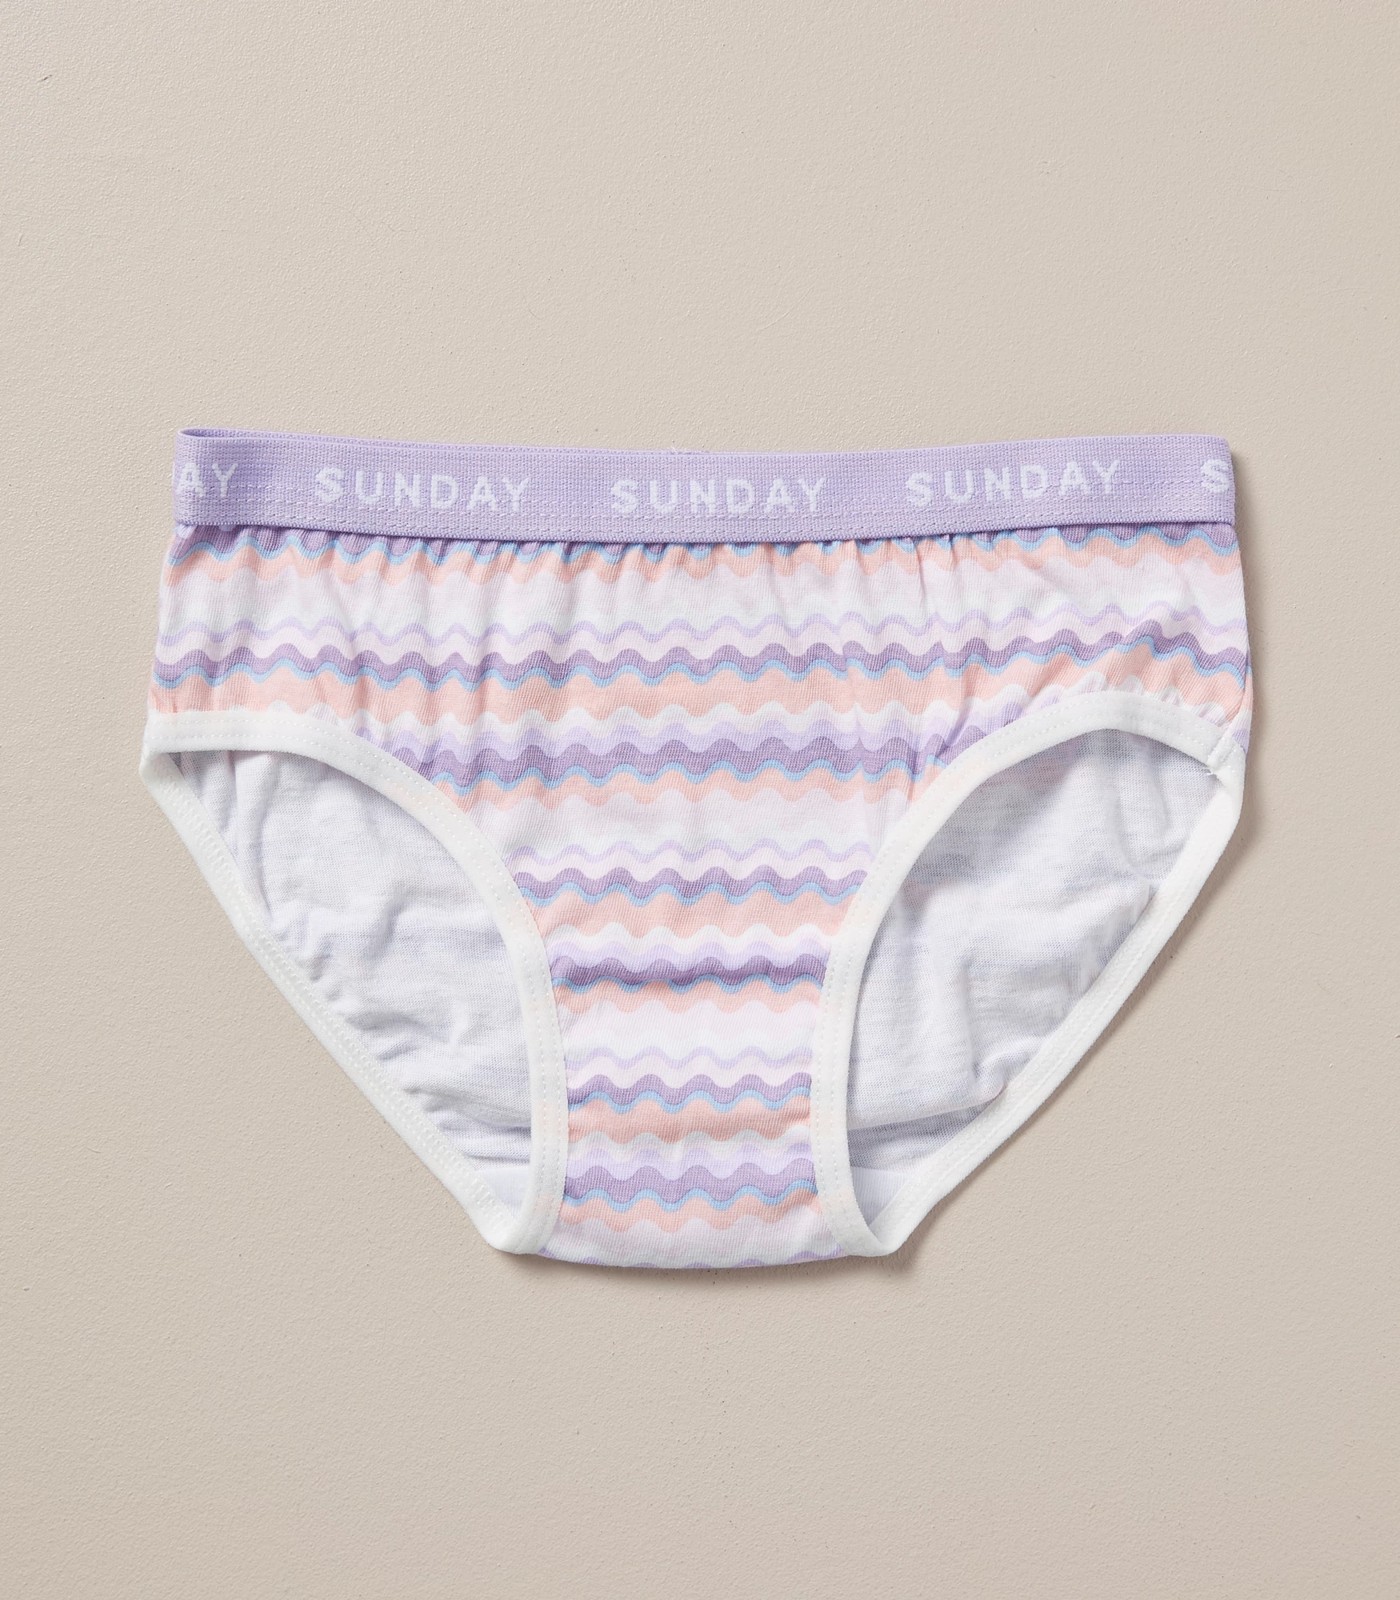 Kmart apologises, swiftly withdraws sexualised underwear for girls